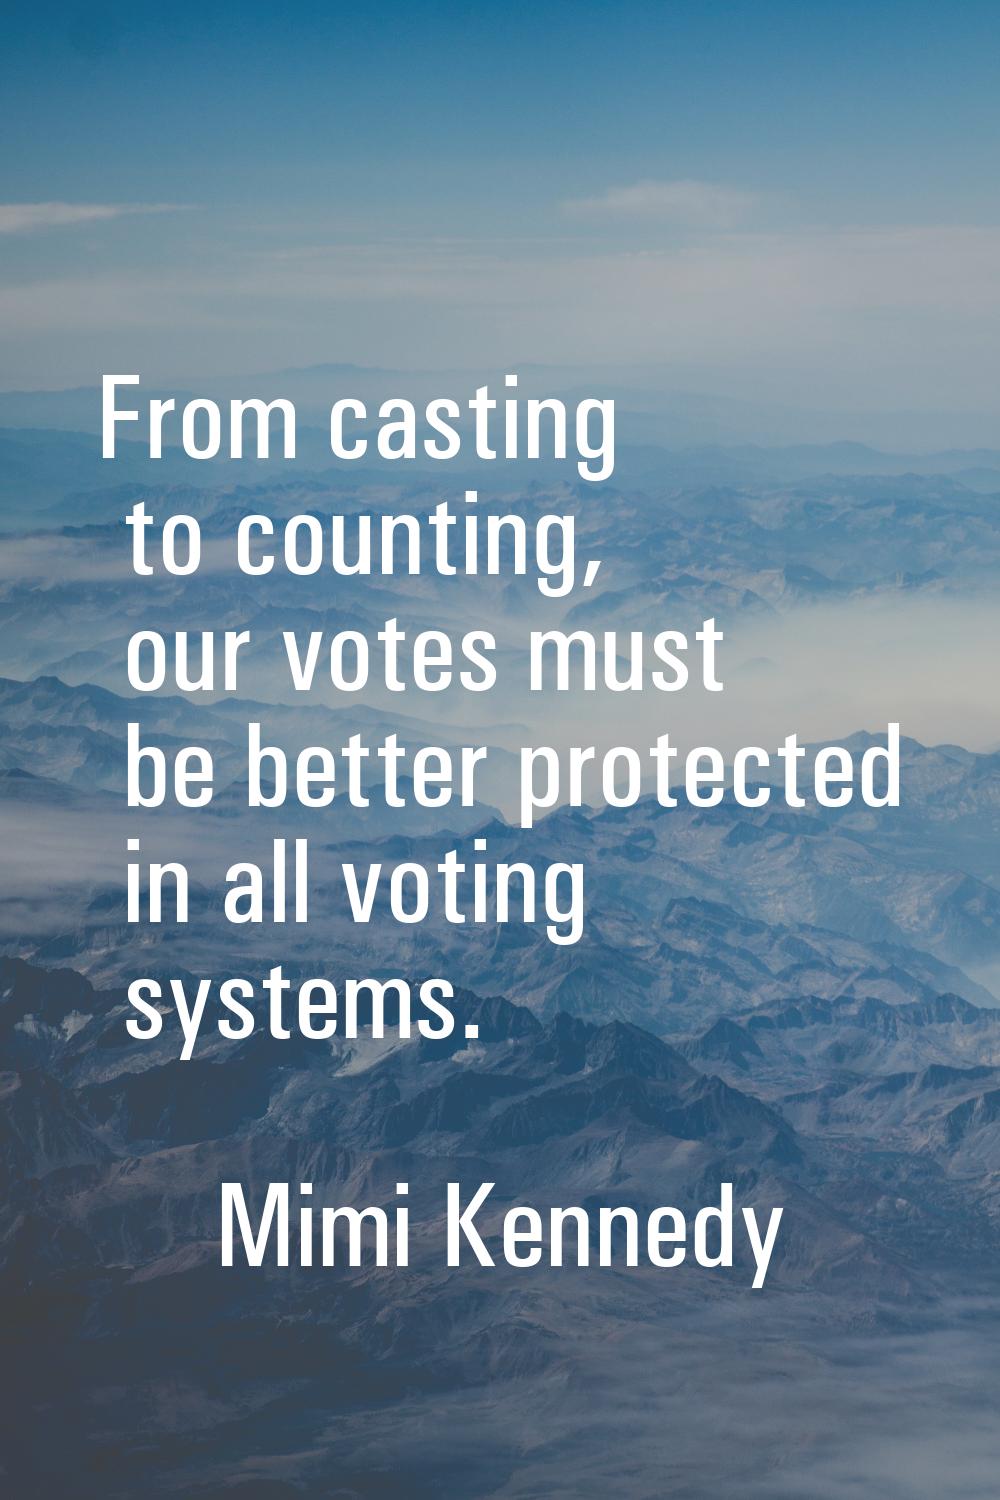 From casting to counting, our votes must be better protected in all voting systems.